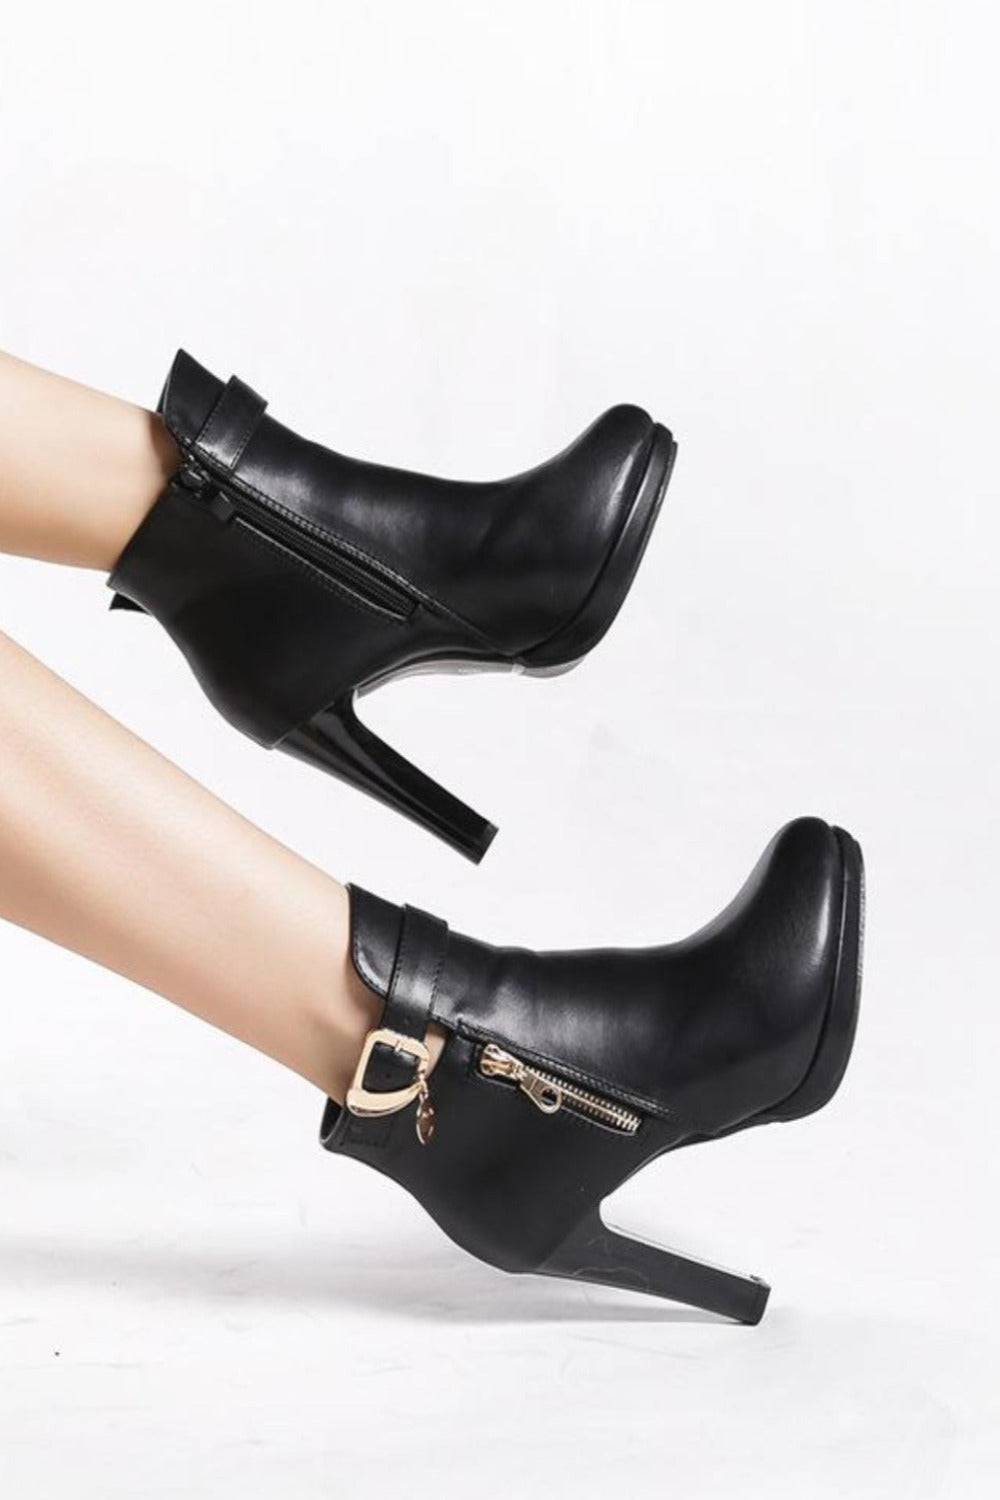 Black High Heel Short Ankle Boots With Gold Buckle - TGC Boutique - Ankle Booties